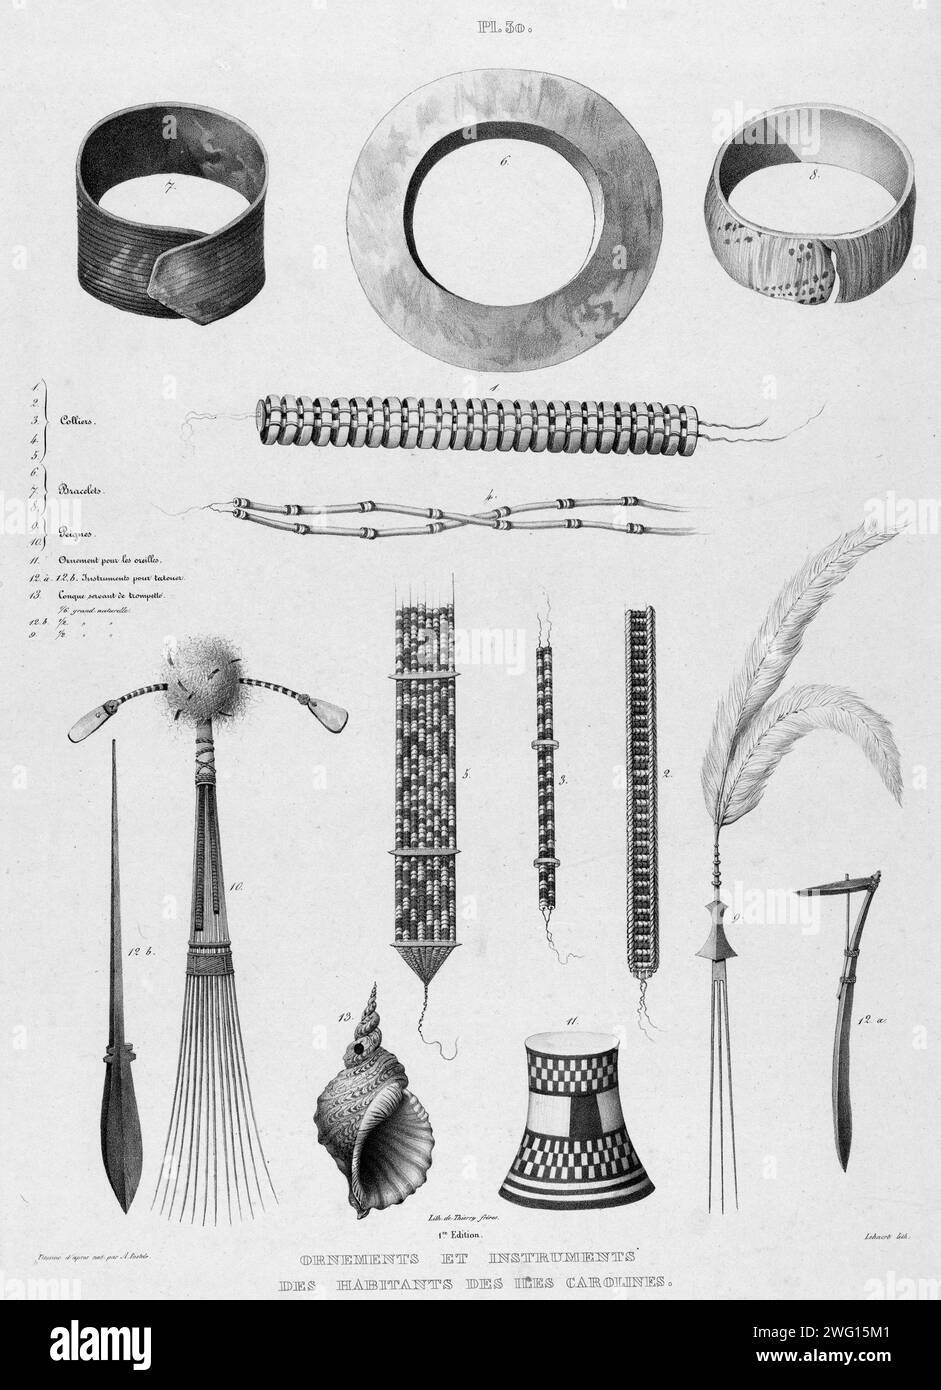 Ornaments and instruments of the inhabitants of the Caroline Islands, 19th century. One of 65 lithographs that were included in the volume of maps published after the round-the-world voyage of the corvette Seniavin commissioned by Tsar Nicholas I and carried out in 1826-29 under the command of Captain Fedor Litke (the Russian version of the name of Count Friedrich Lu&#xa8;tke, a Baltic German). The expedition began in Kronstadt (the main imperial Russian naval base near Saint Petersburg where Russian circumnavigations typically began and ended); it then traveled around Cape Horn to the Pacific Stock Photo